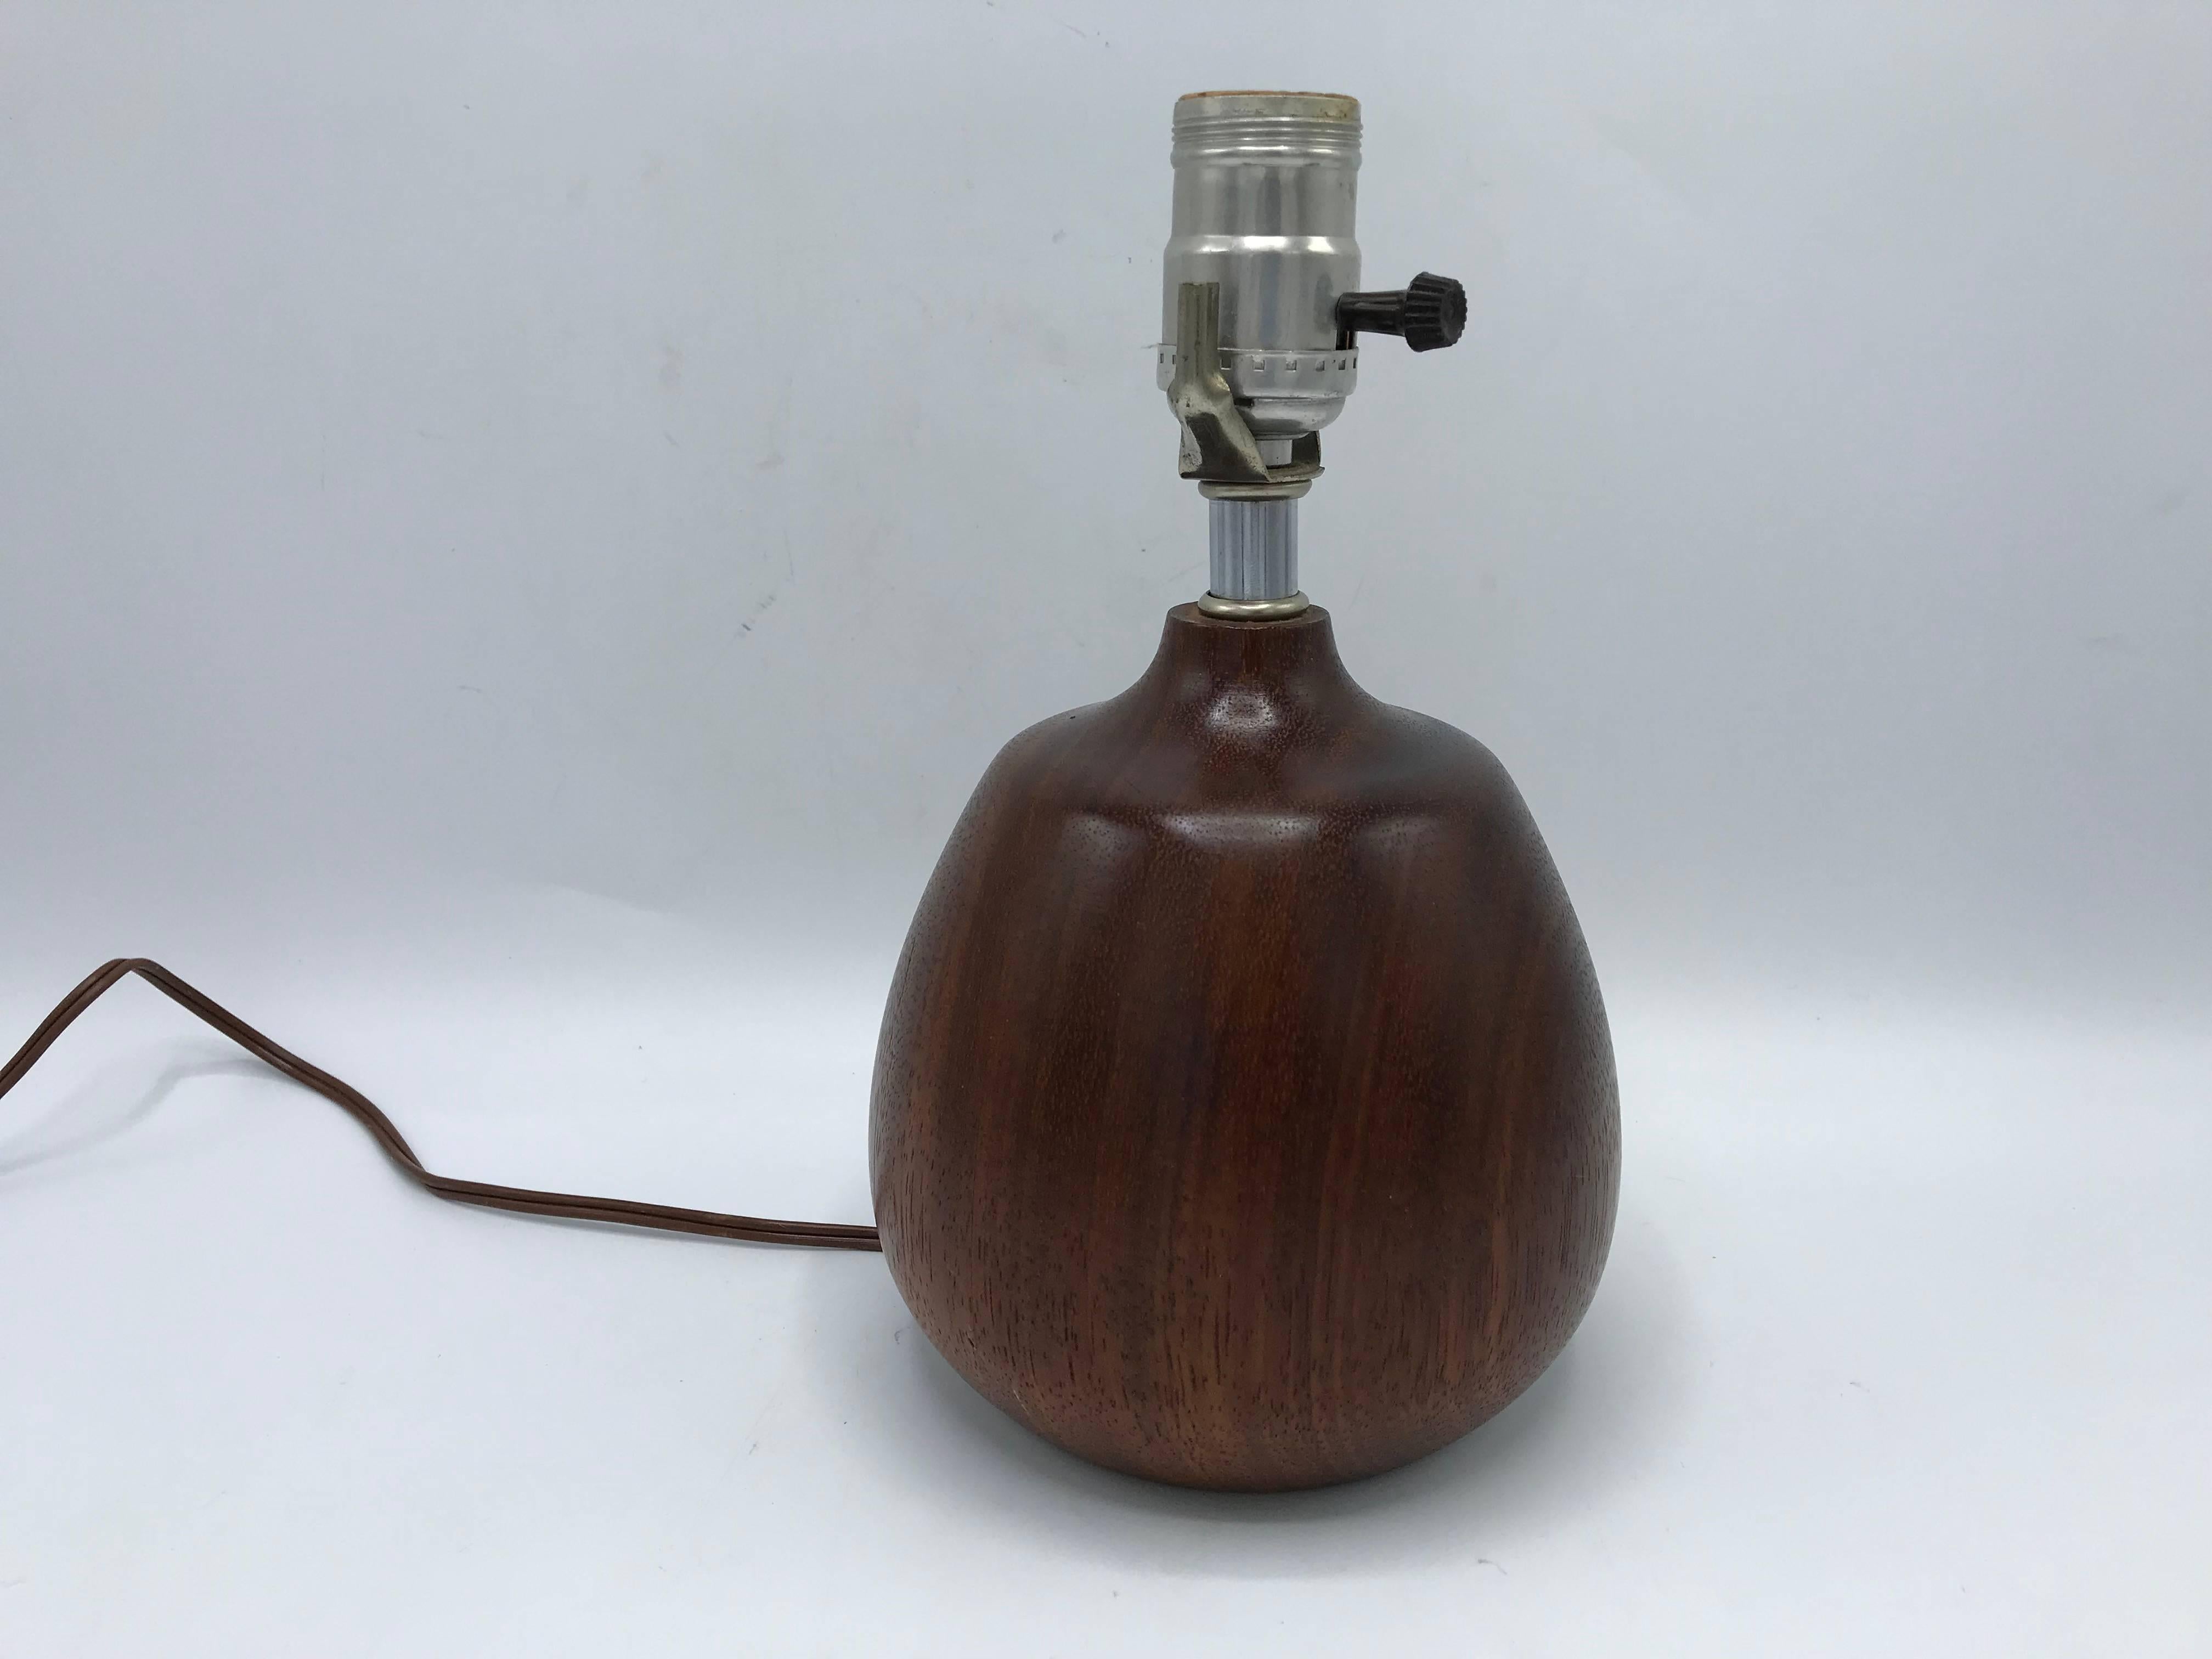 Listed is a modern and sophisticated, 1960s Danish solid-walnut lamp. Original wiring and socket, all in excellent, working condition.